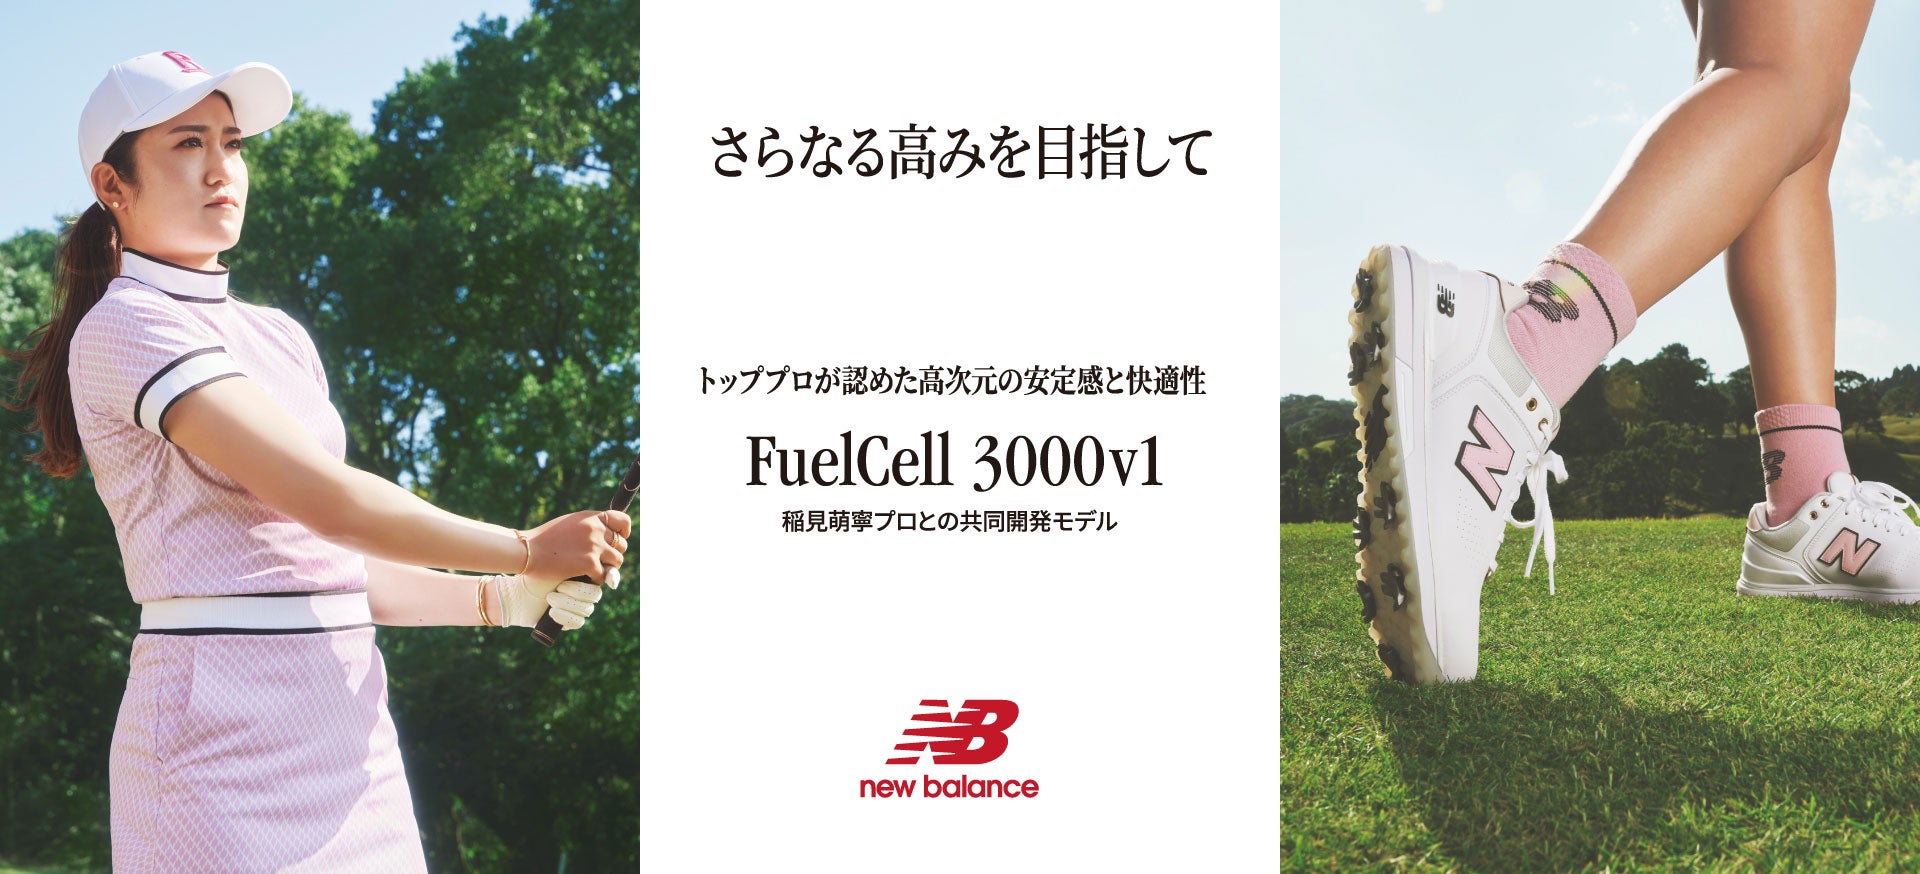 Fuelcell 3000v1|高尔夫